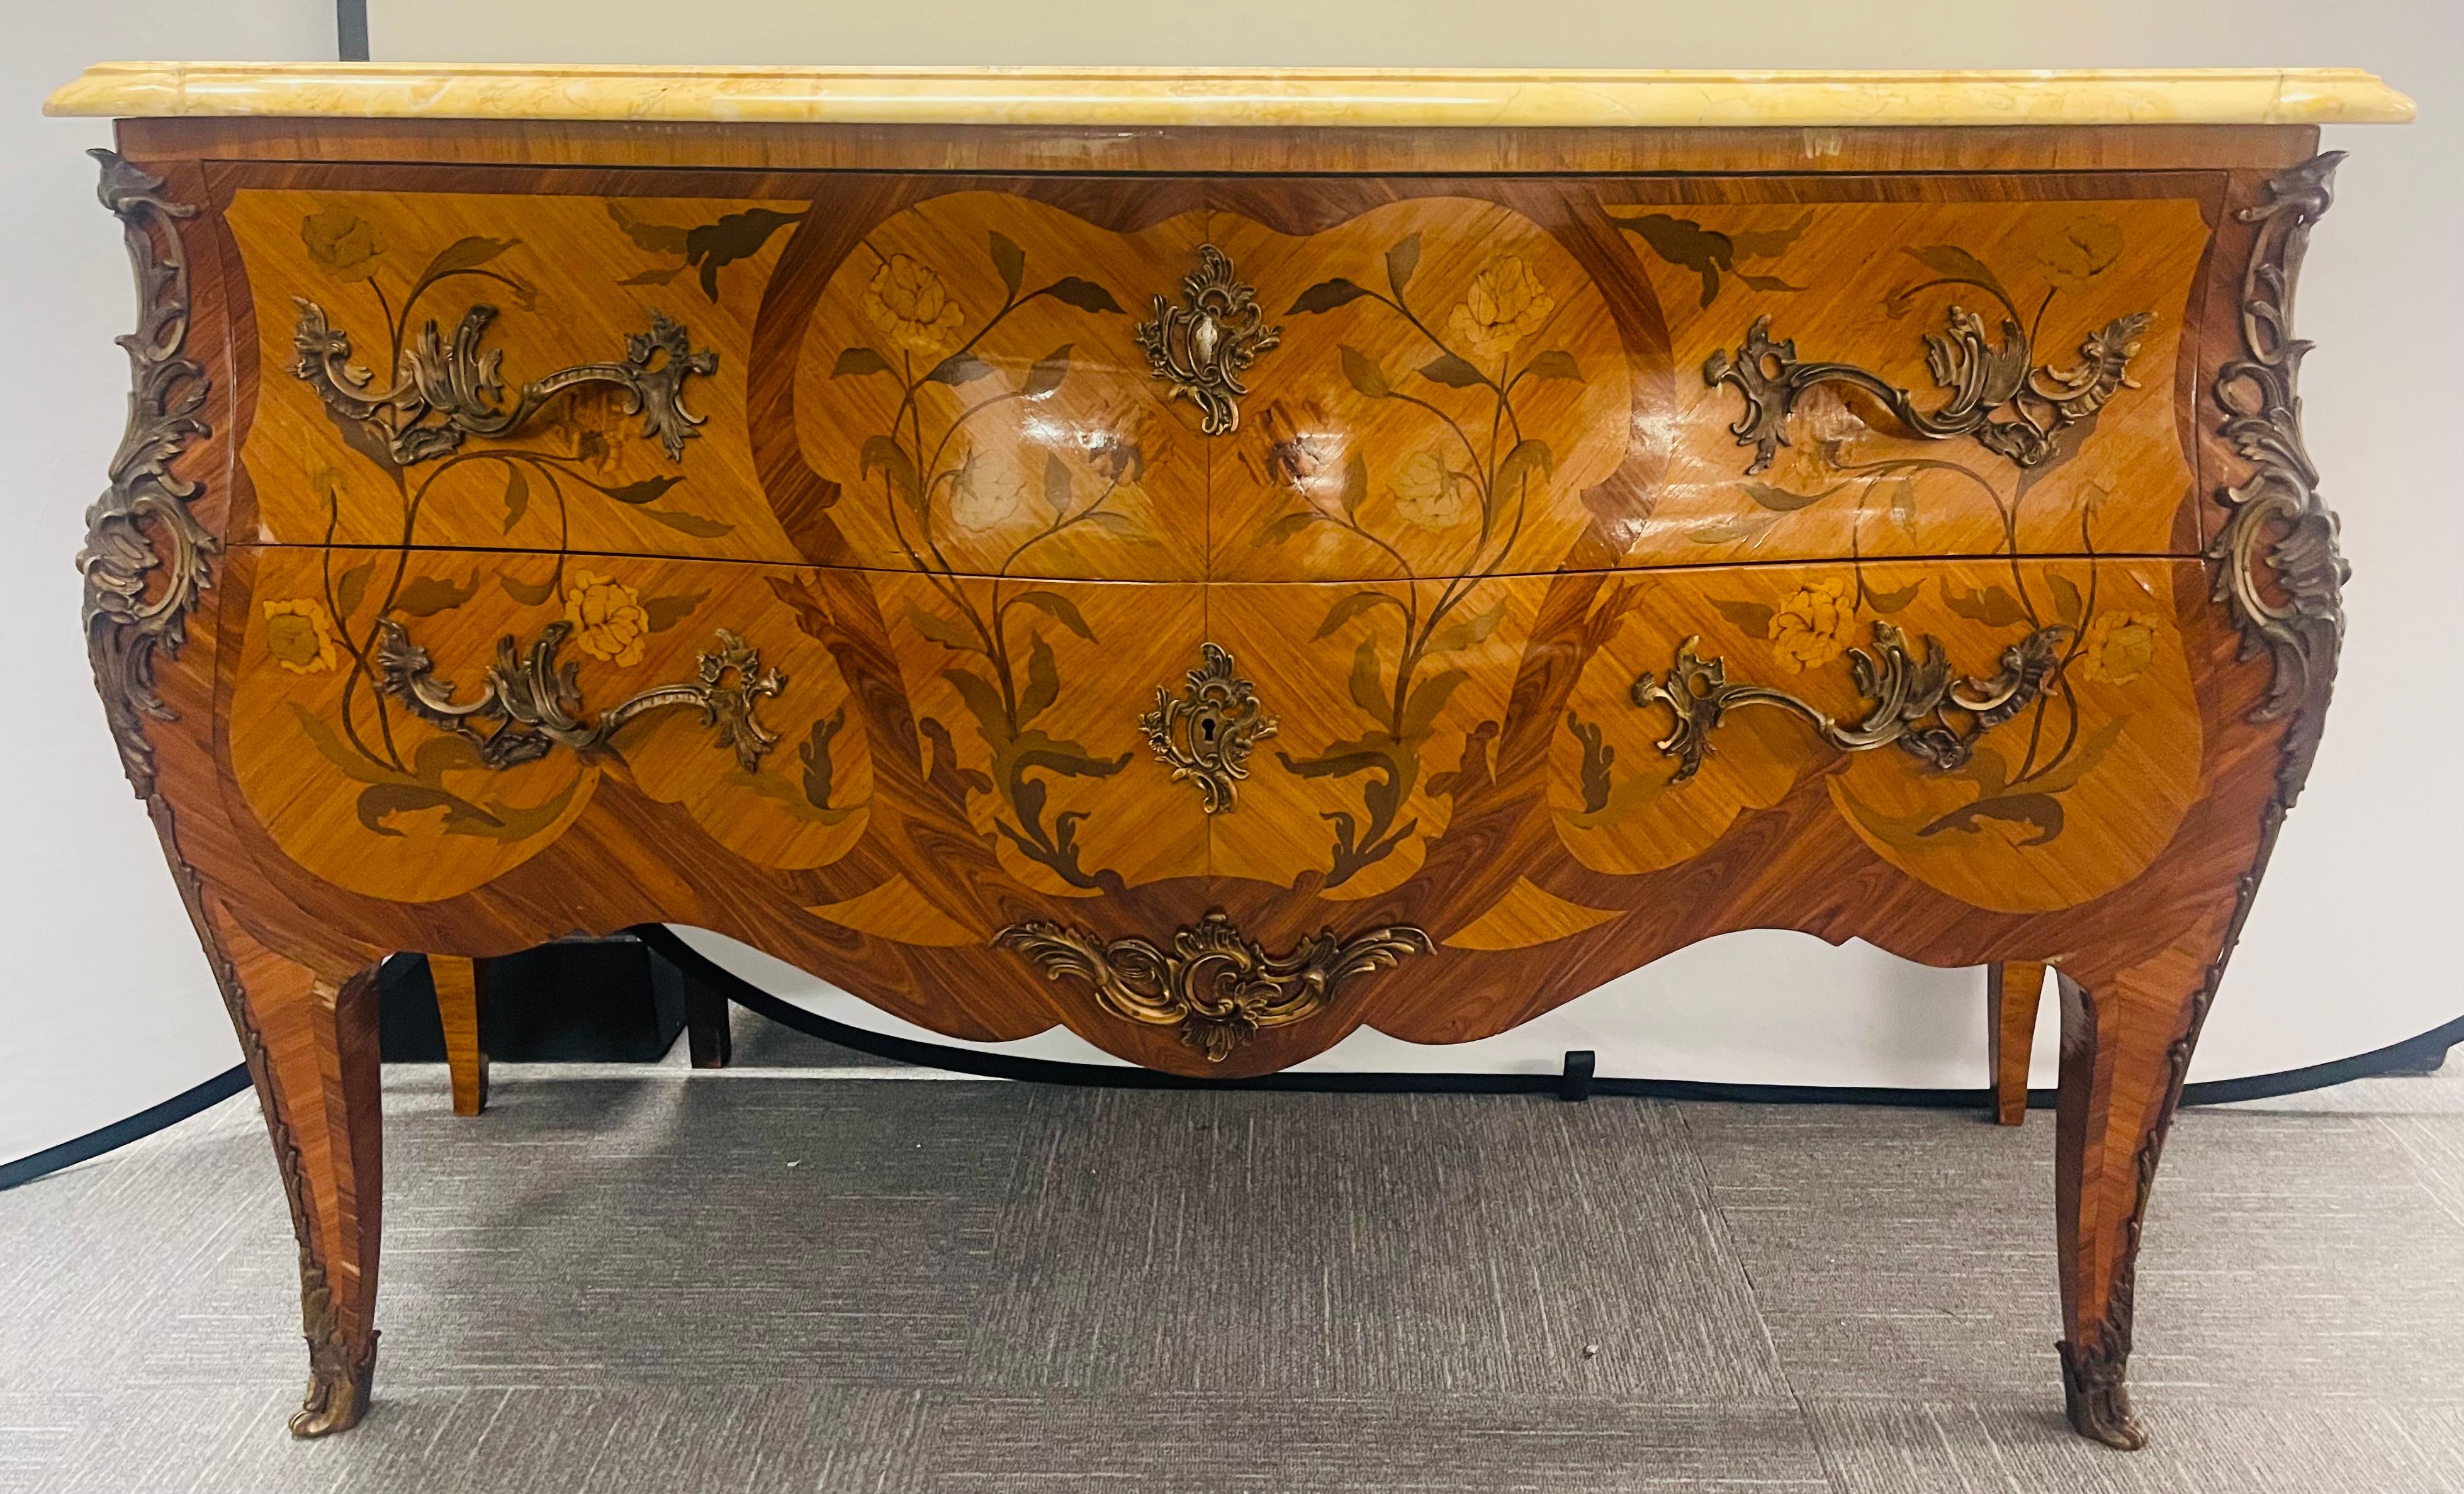 A finely crafted Louis XV style Commode or chest of drawers. The whole having oak secondaries with bronze mounts and full bronze mounted corners running from the full shoe sabots to the top of the chest. The chest having a wonderful floral and vine